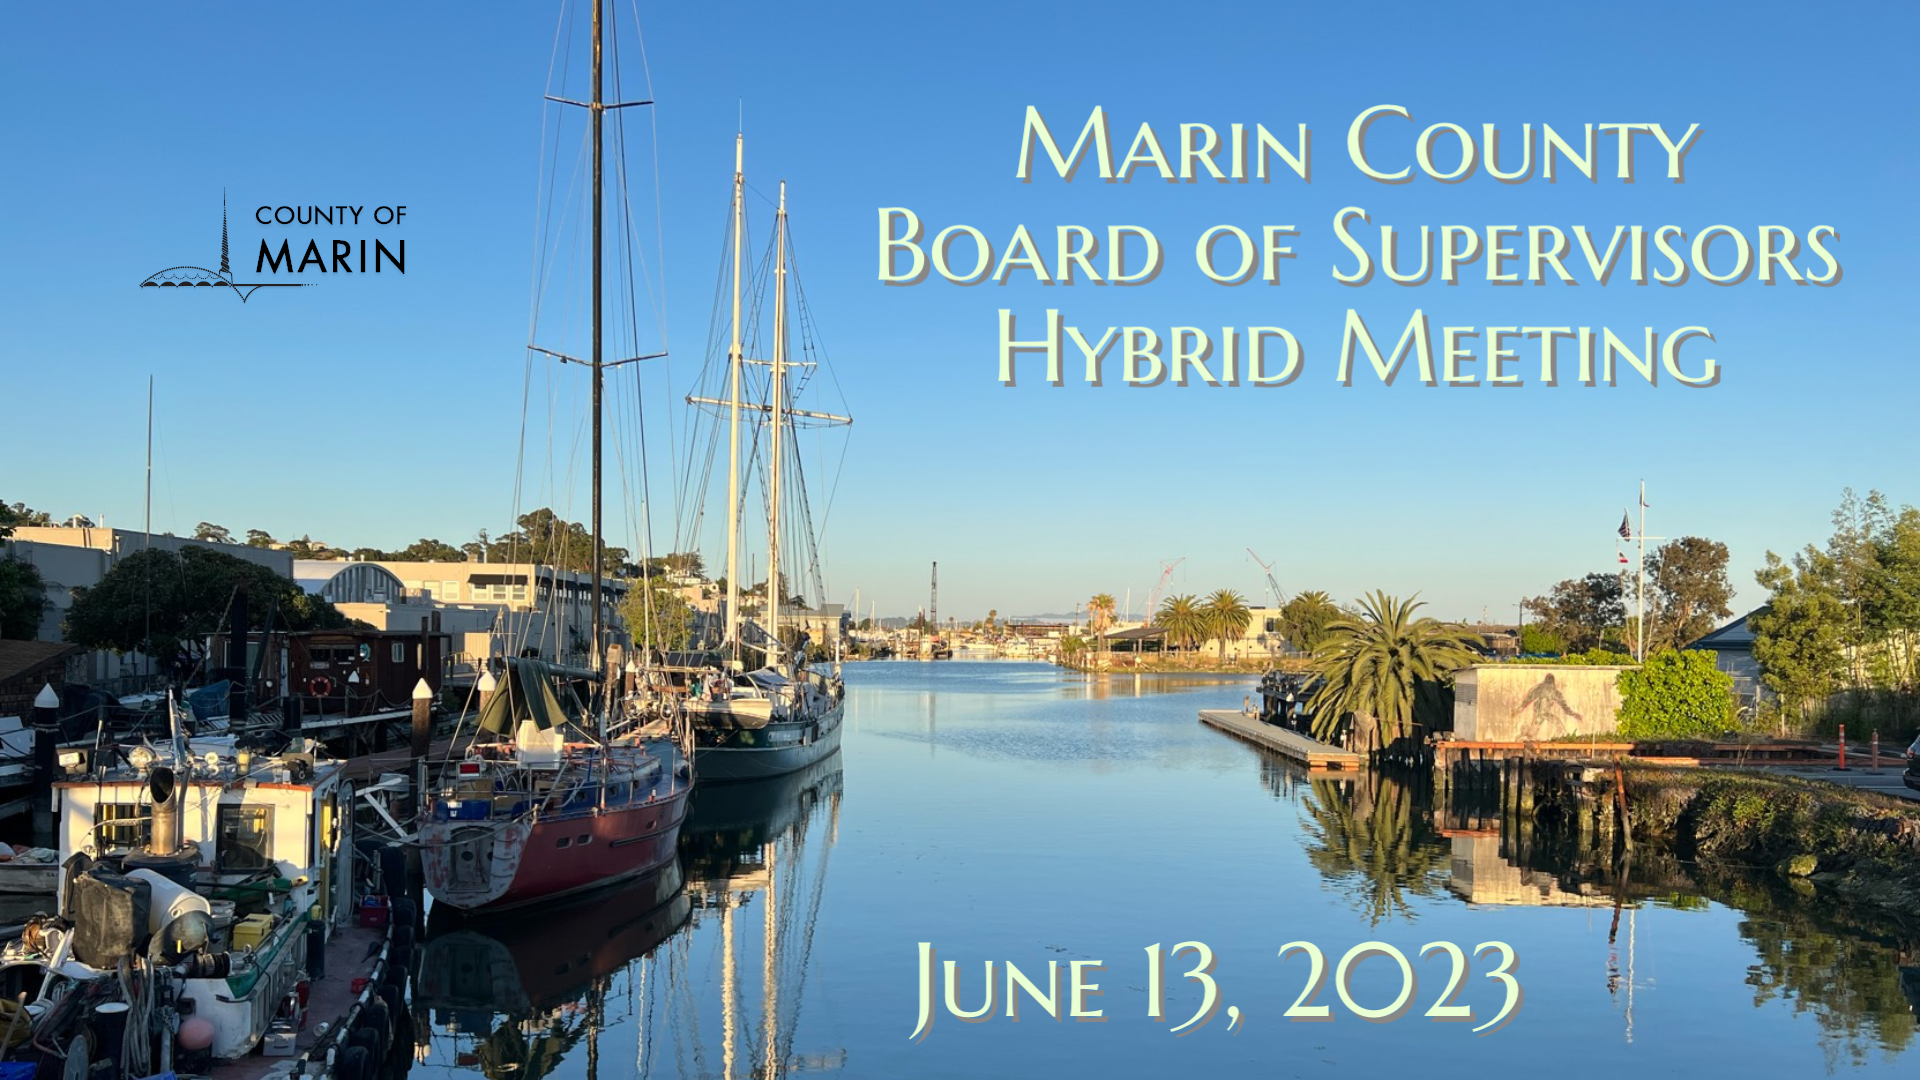 Marin County Board of Supervisors Hybrid Meeting Tuesday, June 13, 2023 8:30 AM